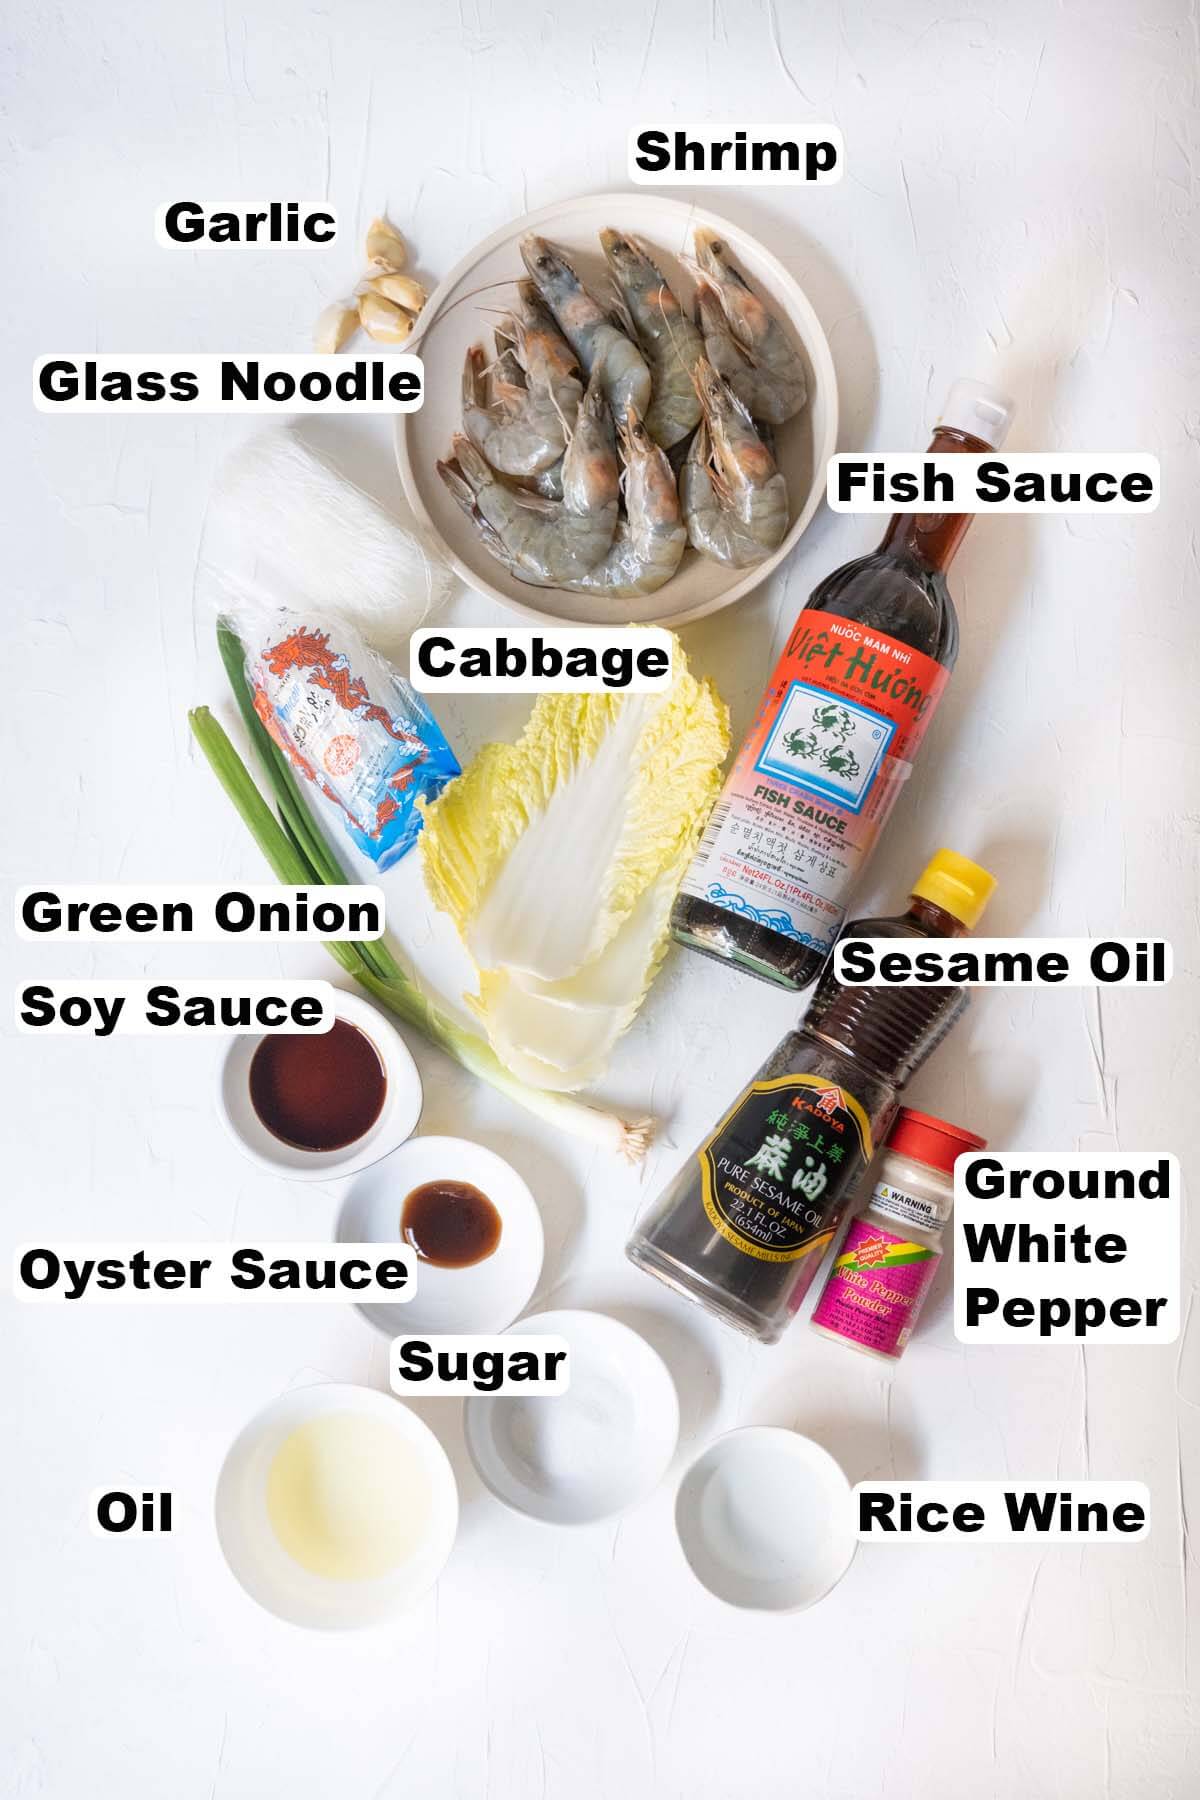 Ingredients for shrimp and glass noodles. recipe.